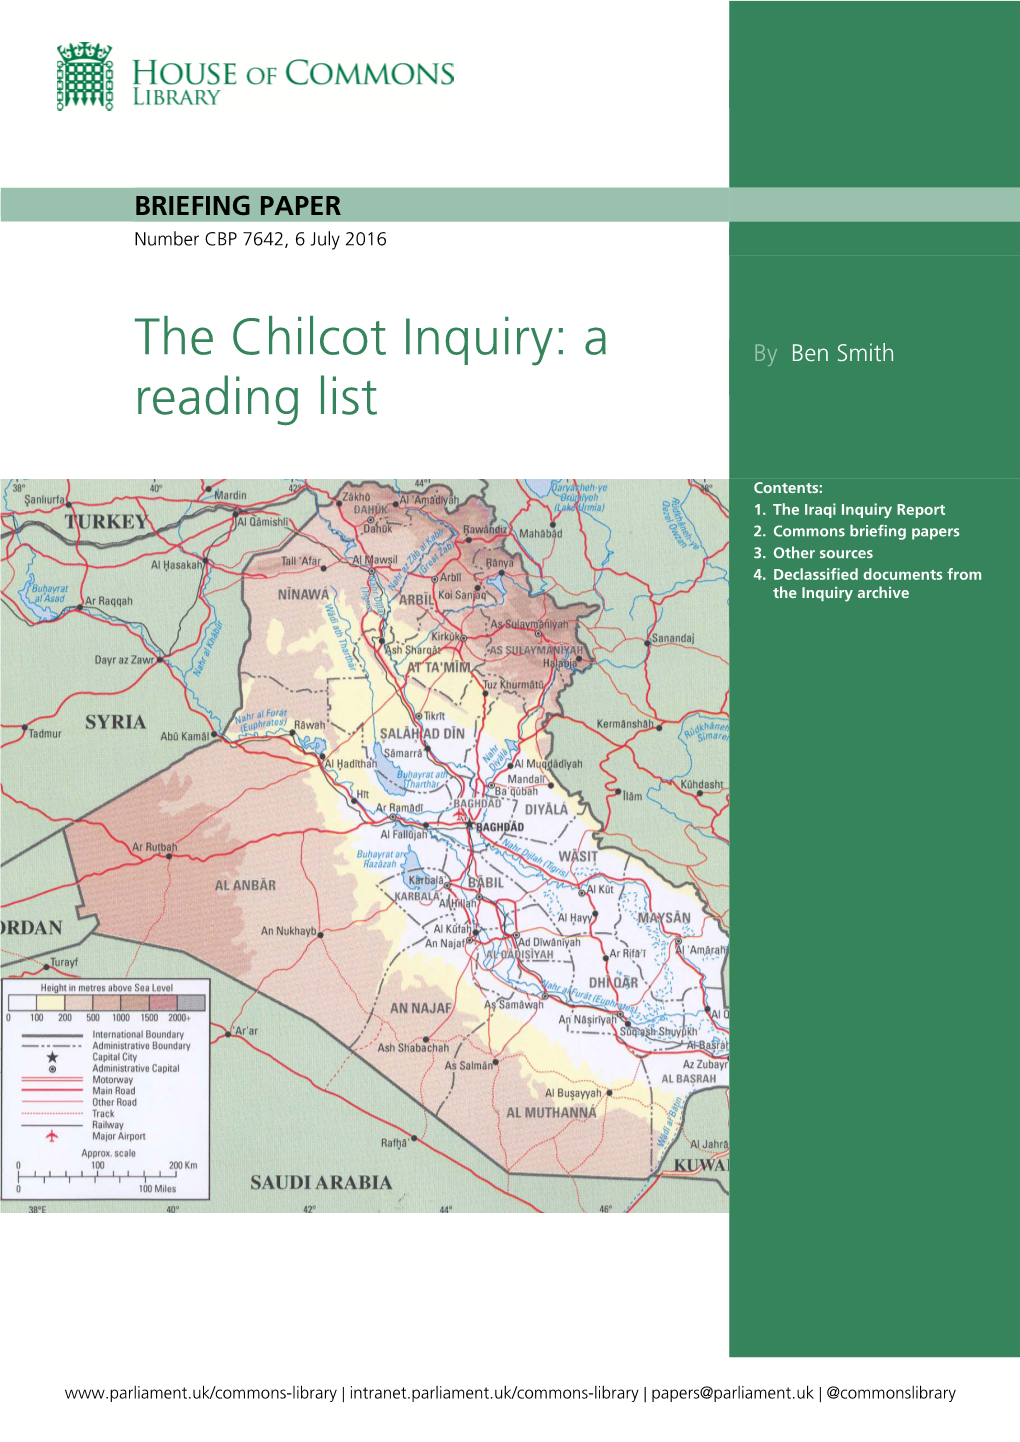 The Chilcot Inquiry: a Reading List